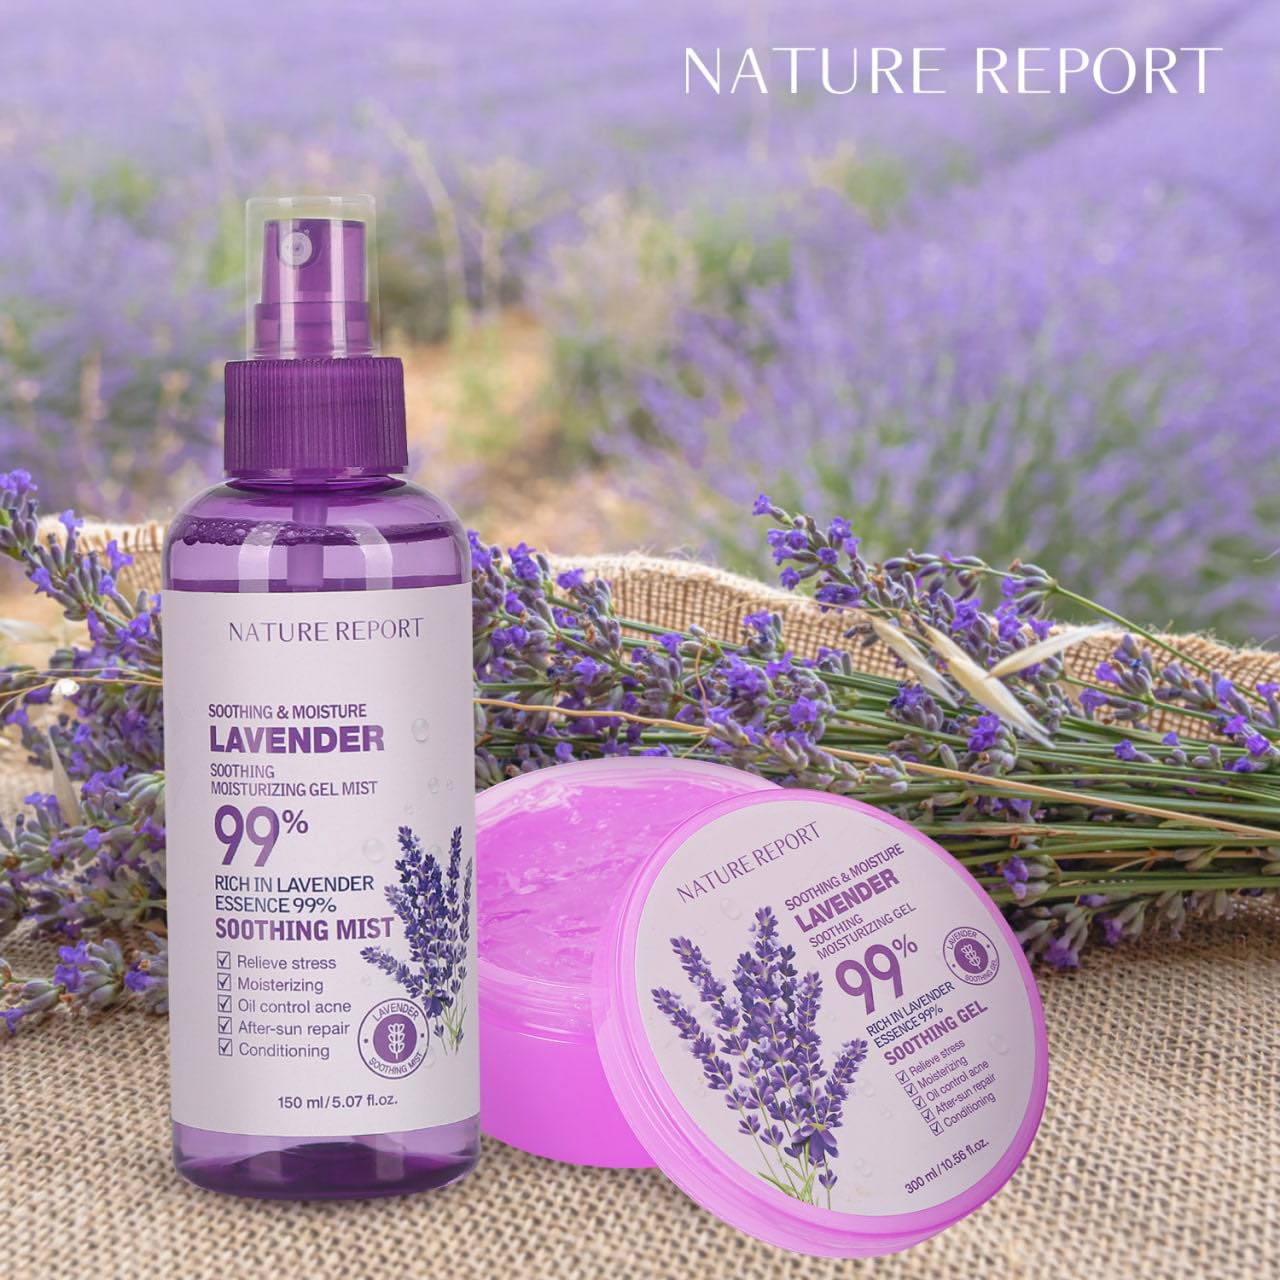 Nature Report Lavender Soothing Gel 99% 300Ml - IZZAT DAOUK SA